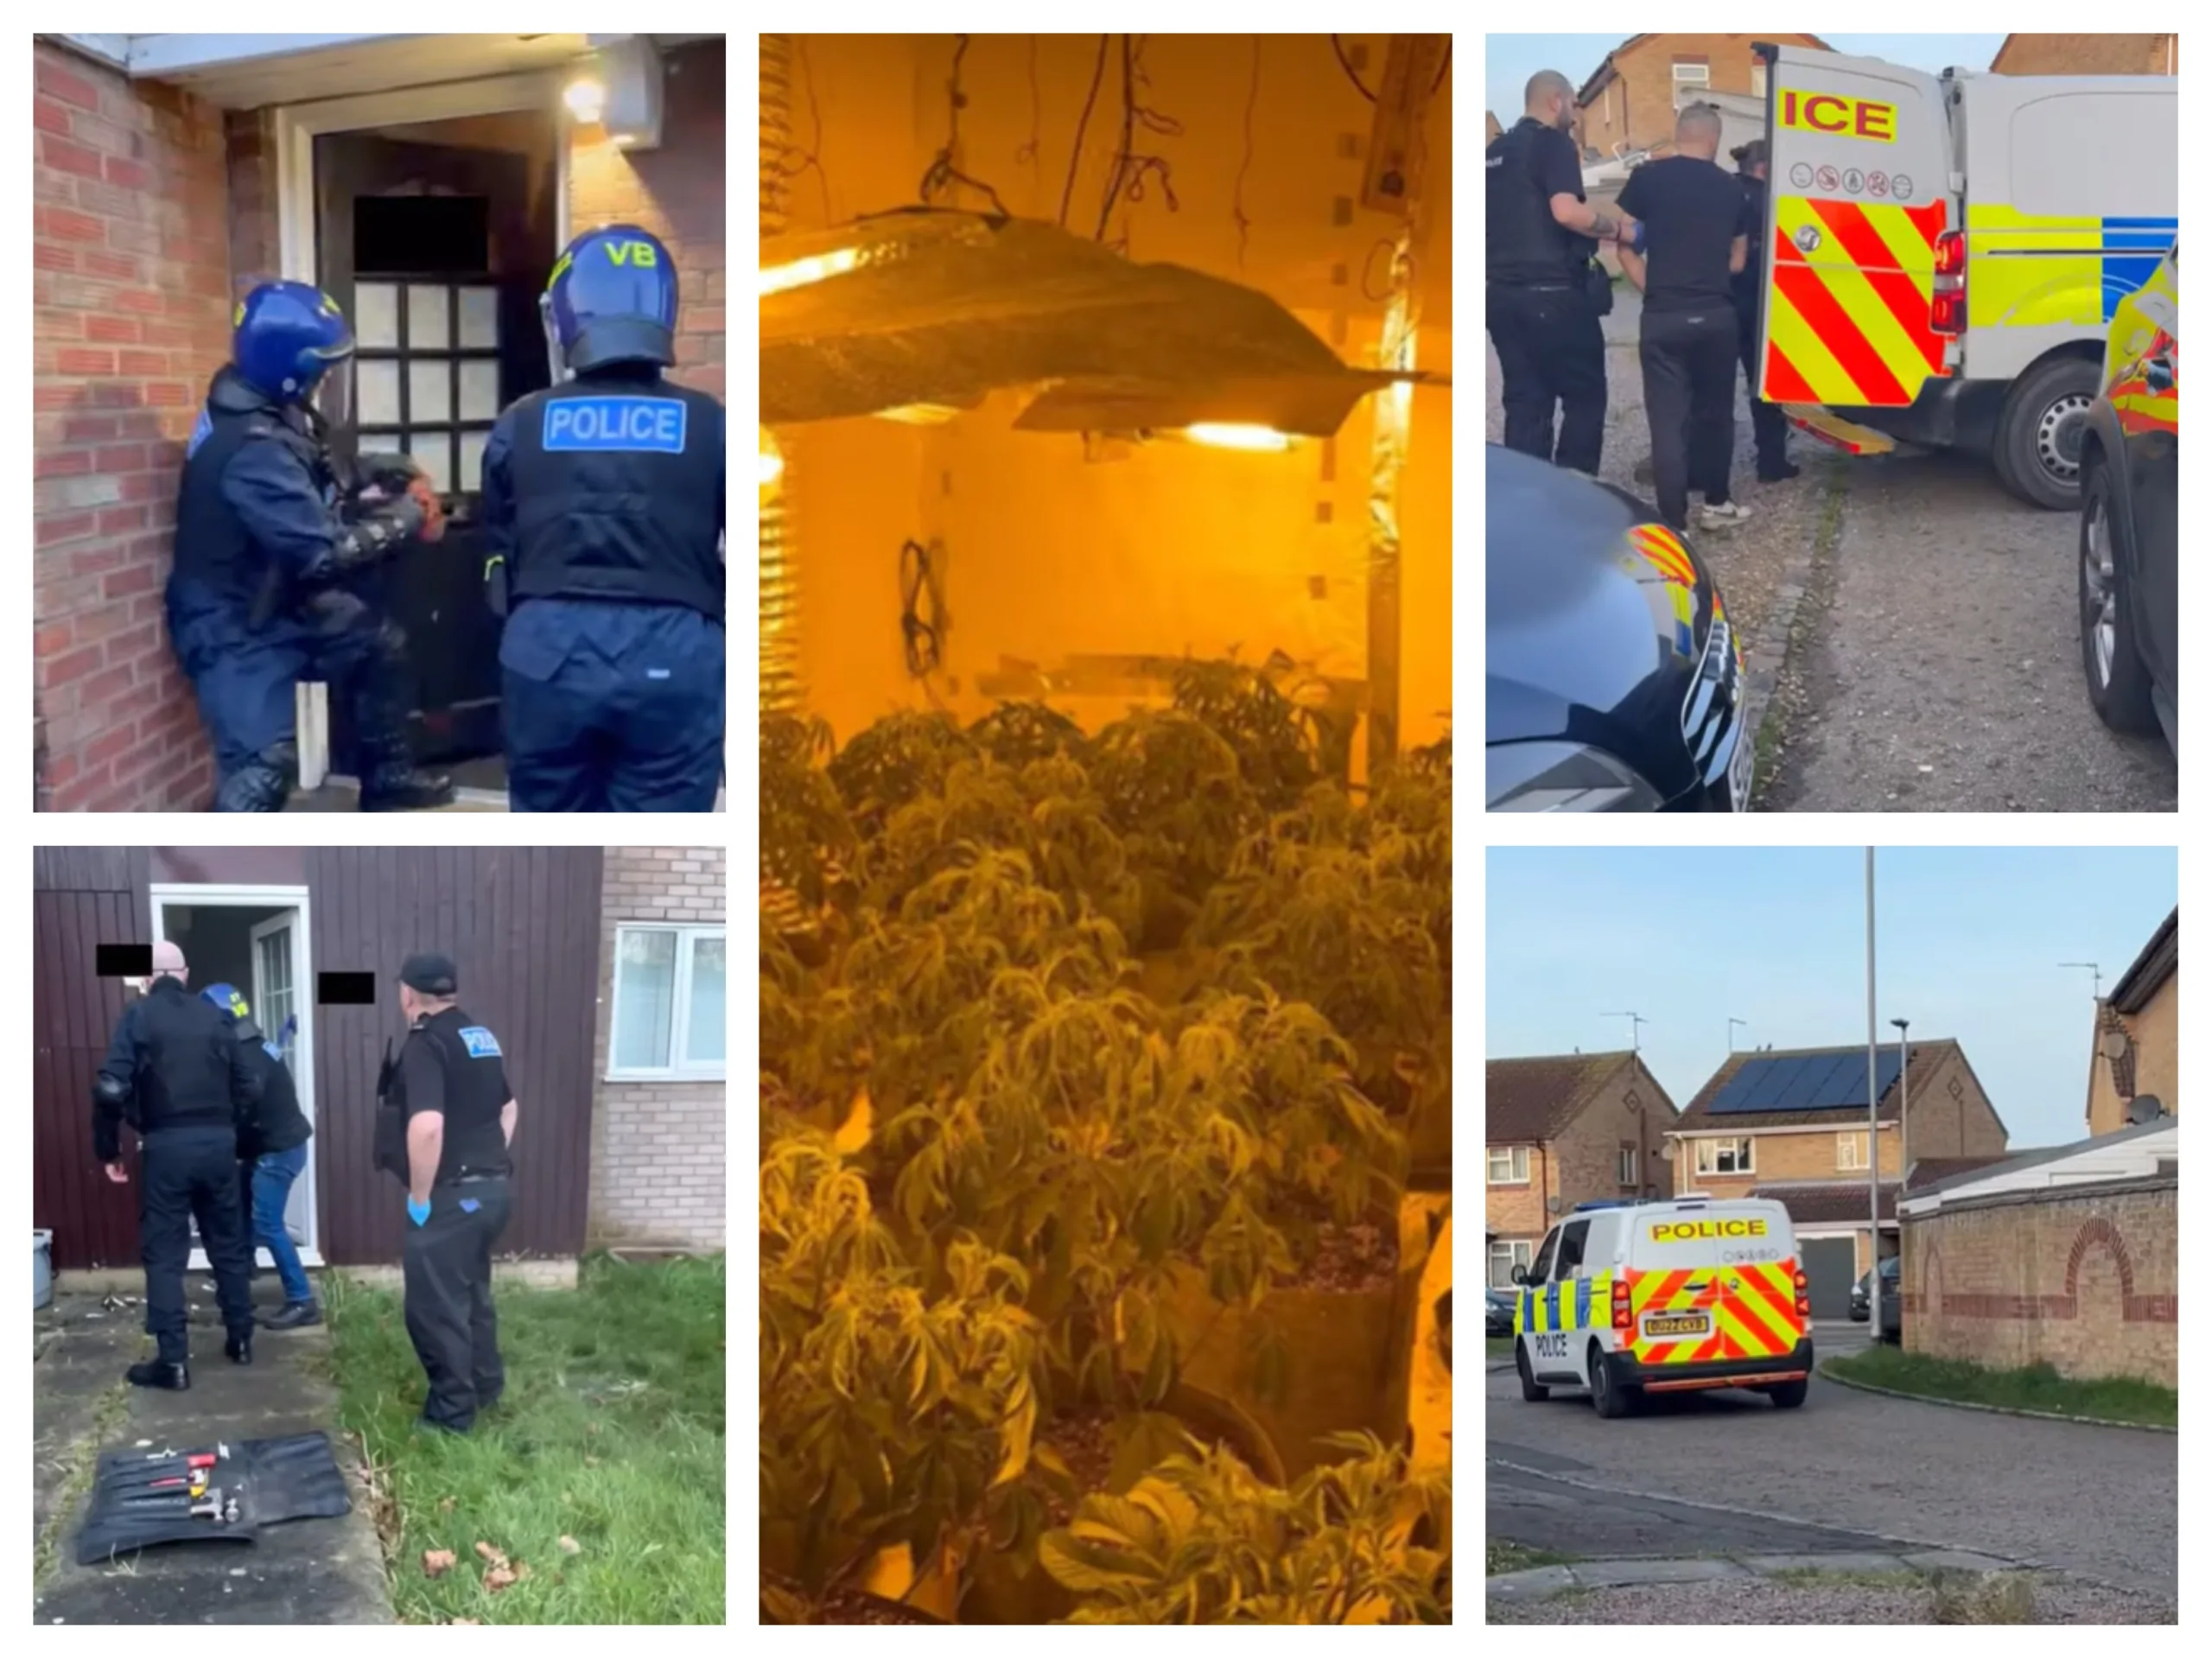 Photos taken from video released by Cambridgeshire police showing warrants being executed across Peterborough